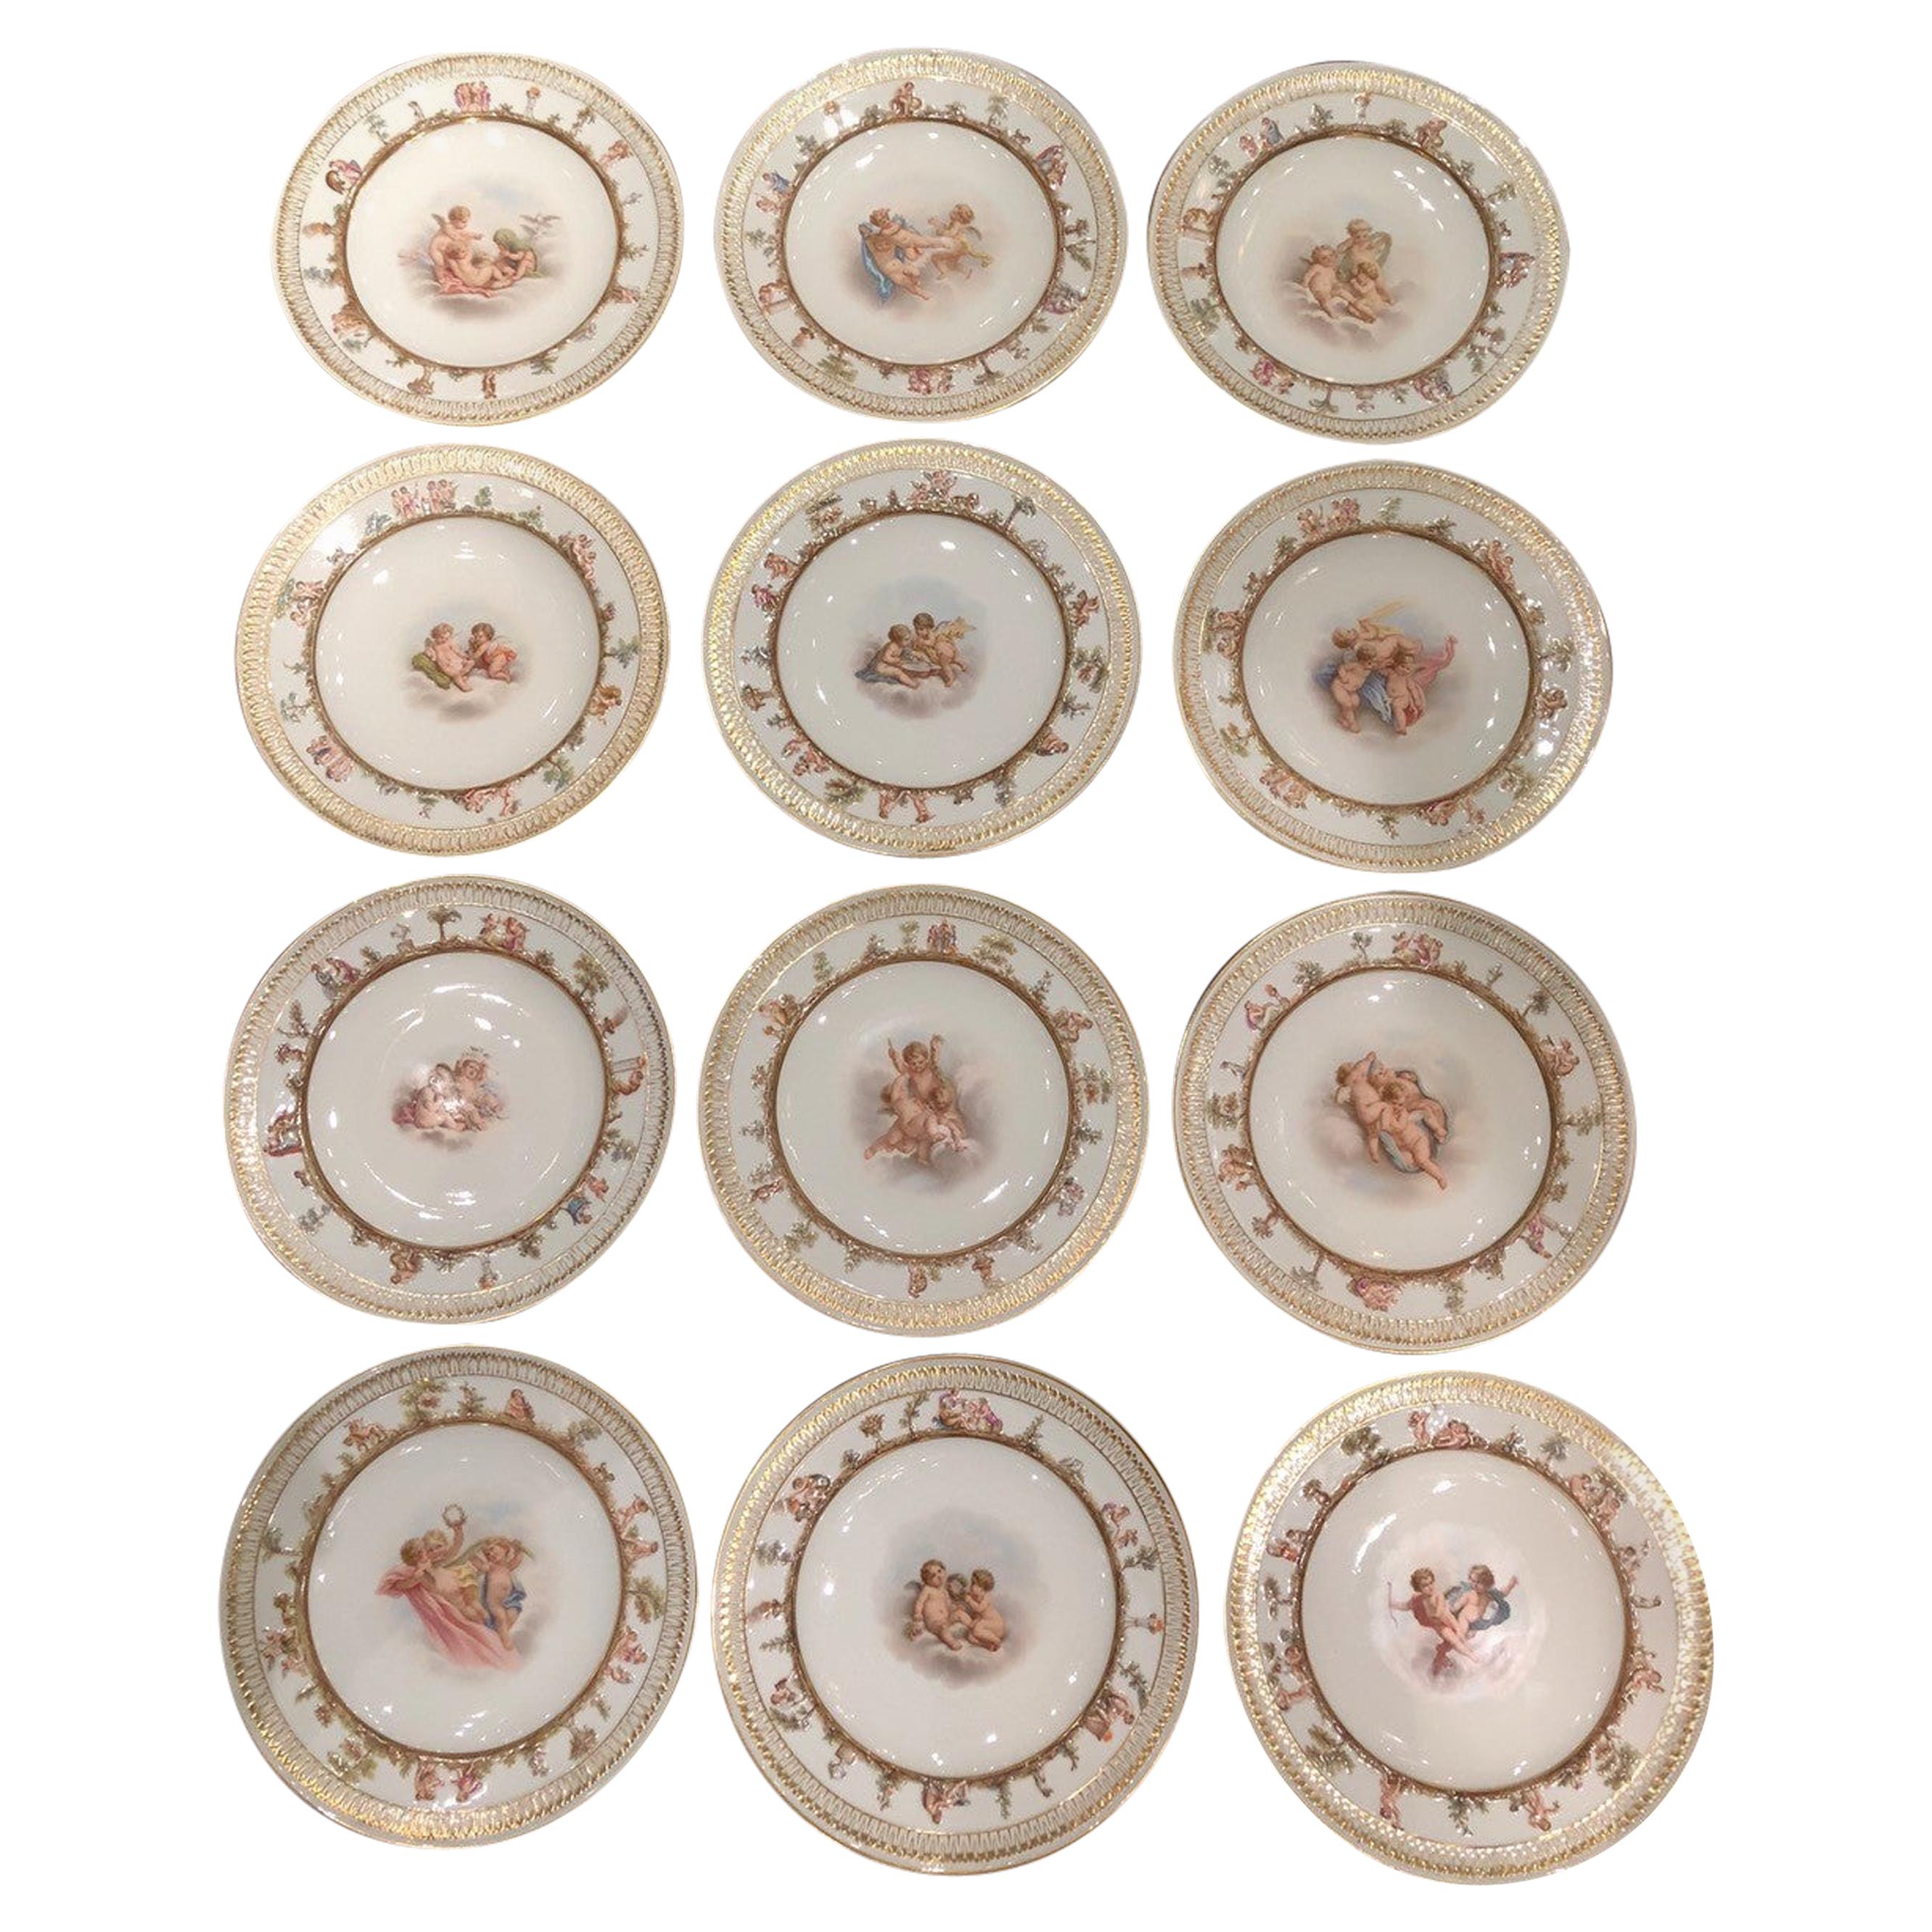 Set of Twelve Meissen Porcelain Plates with Putti and Heavenly Scenes For Sale